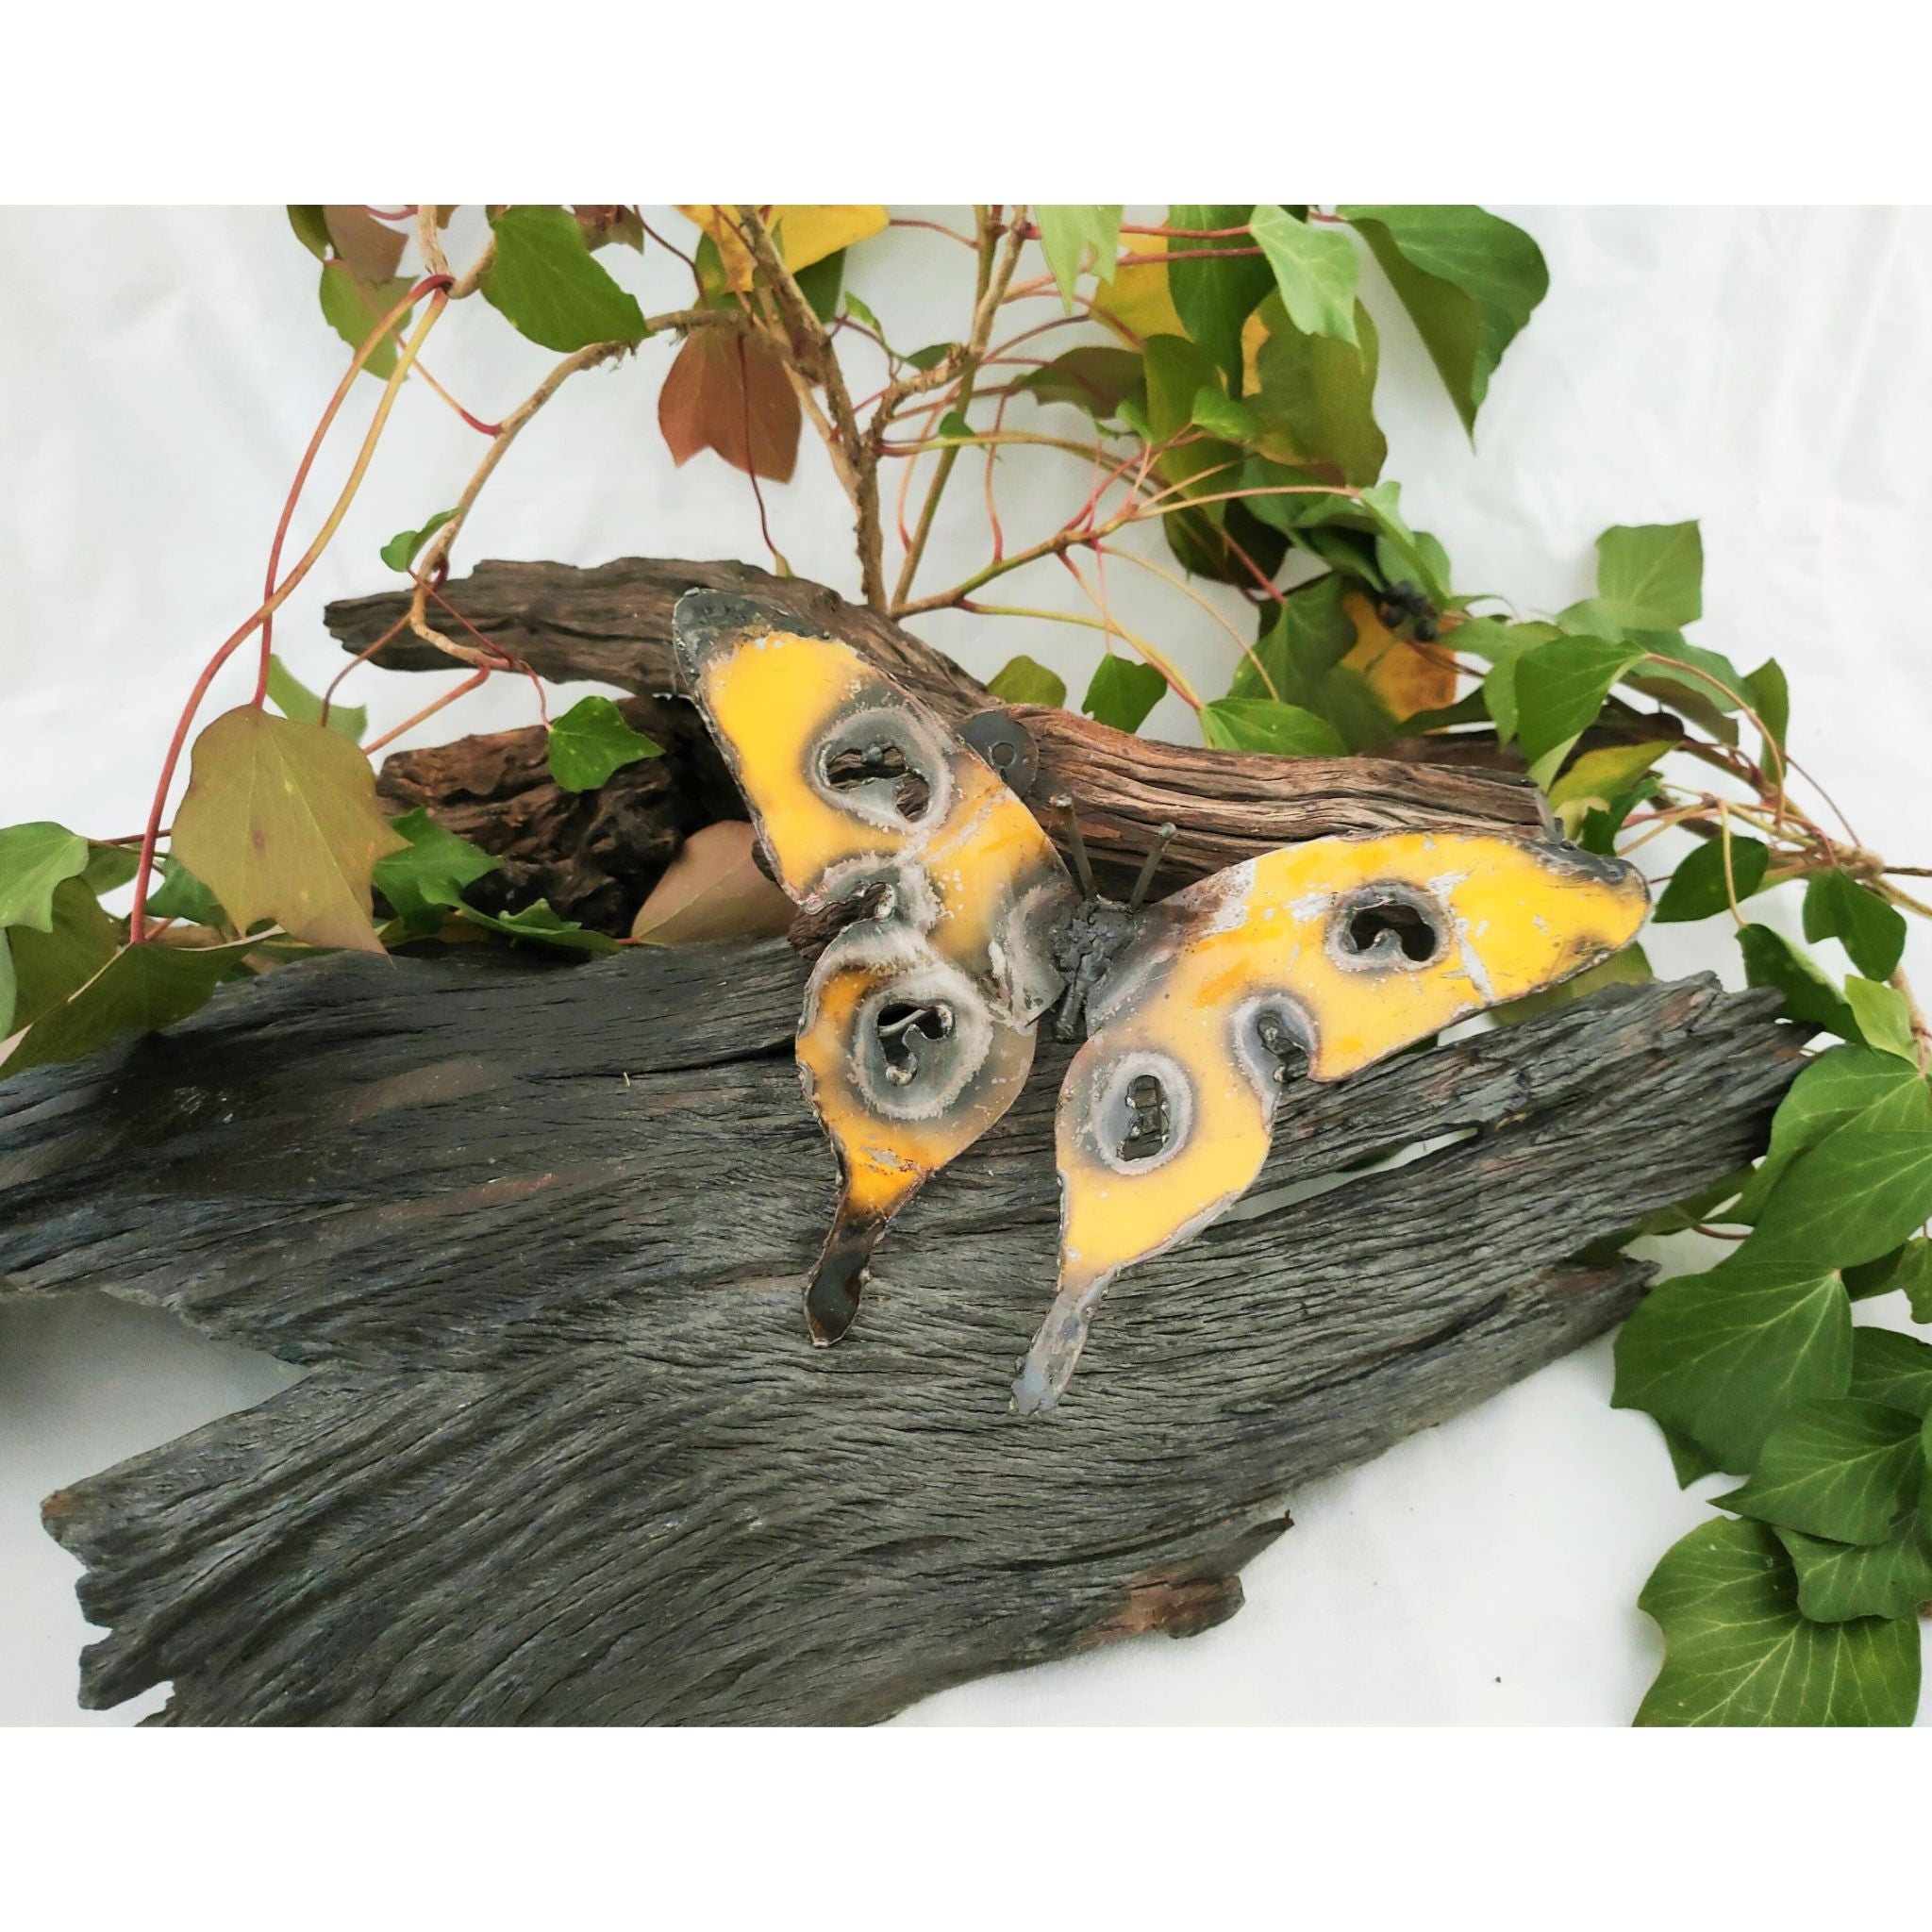 Jeff Butterfly Recycled Metal yellow colour on log